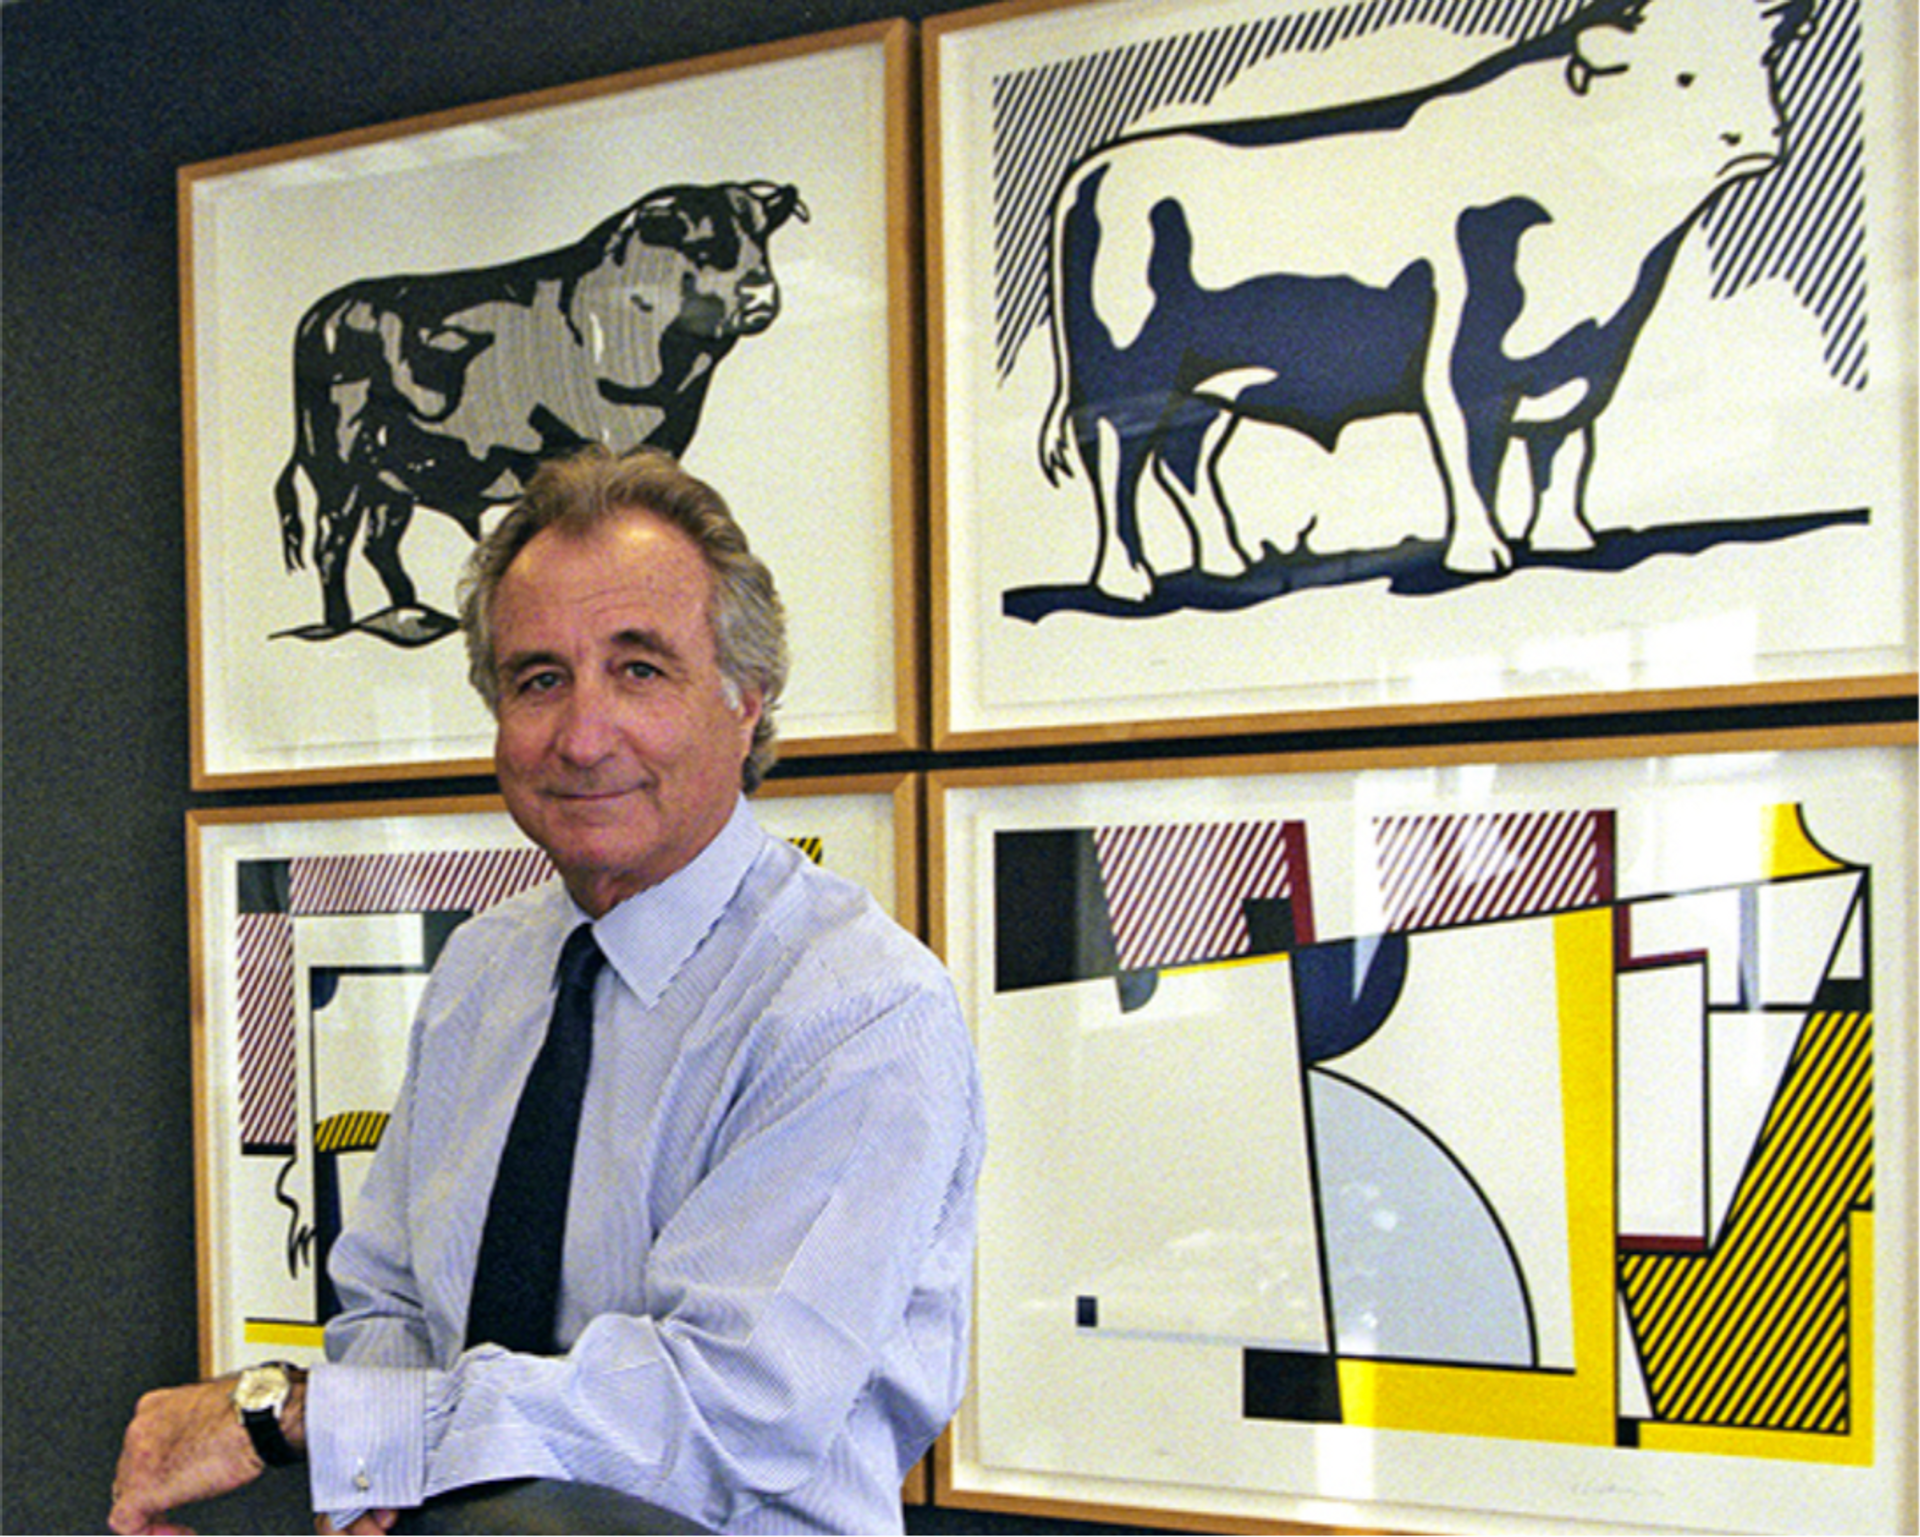 Bernie Madoff standing in front of his editions of Roy Lichtenstein’s Bull Profile Series.